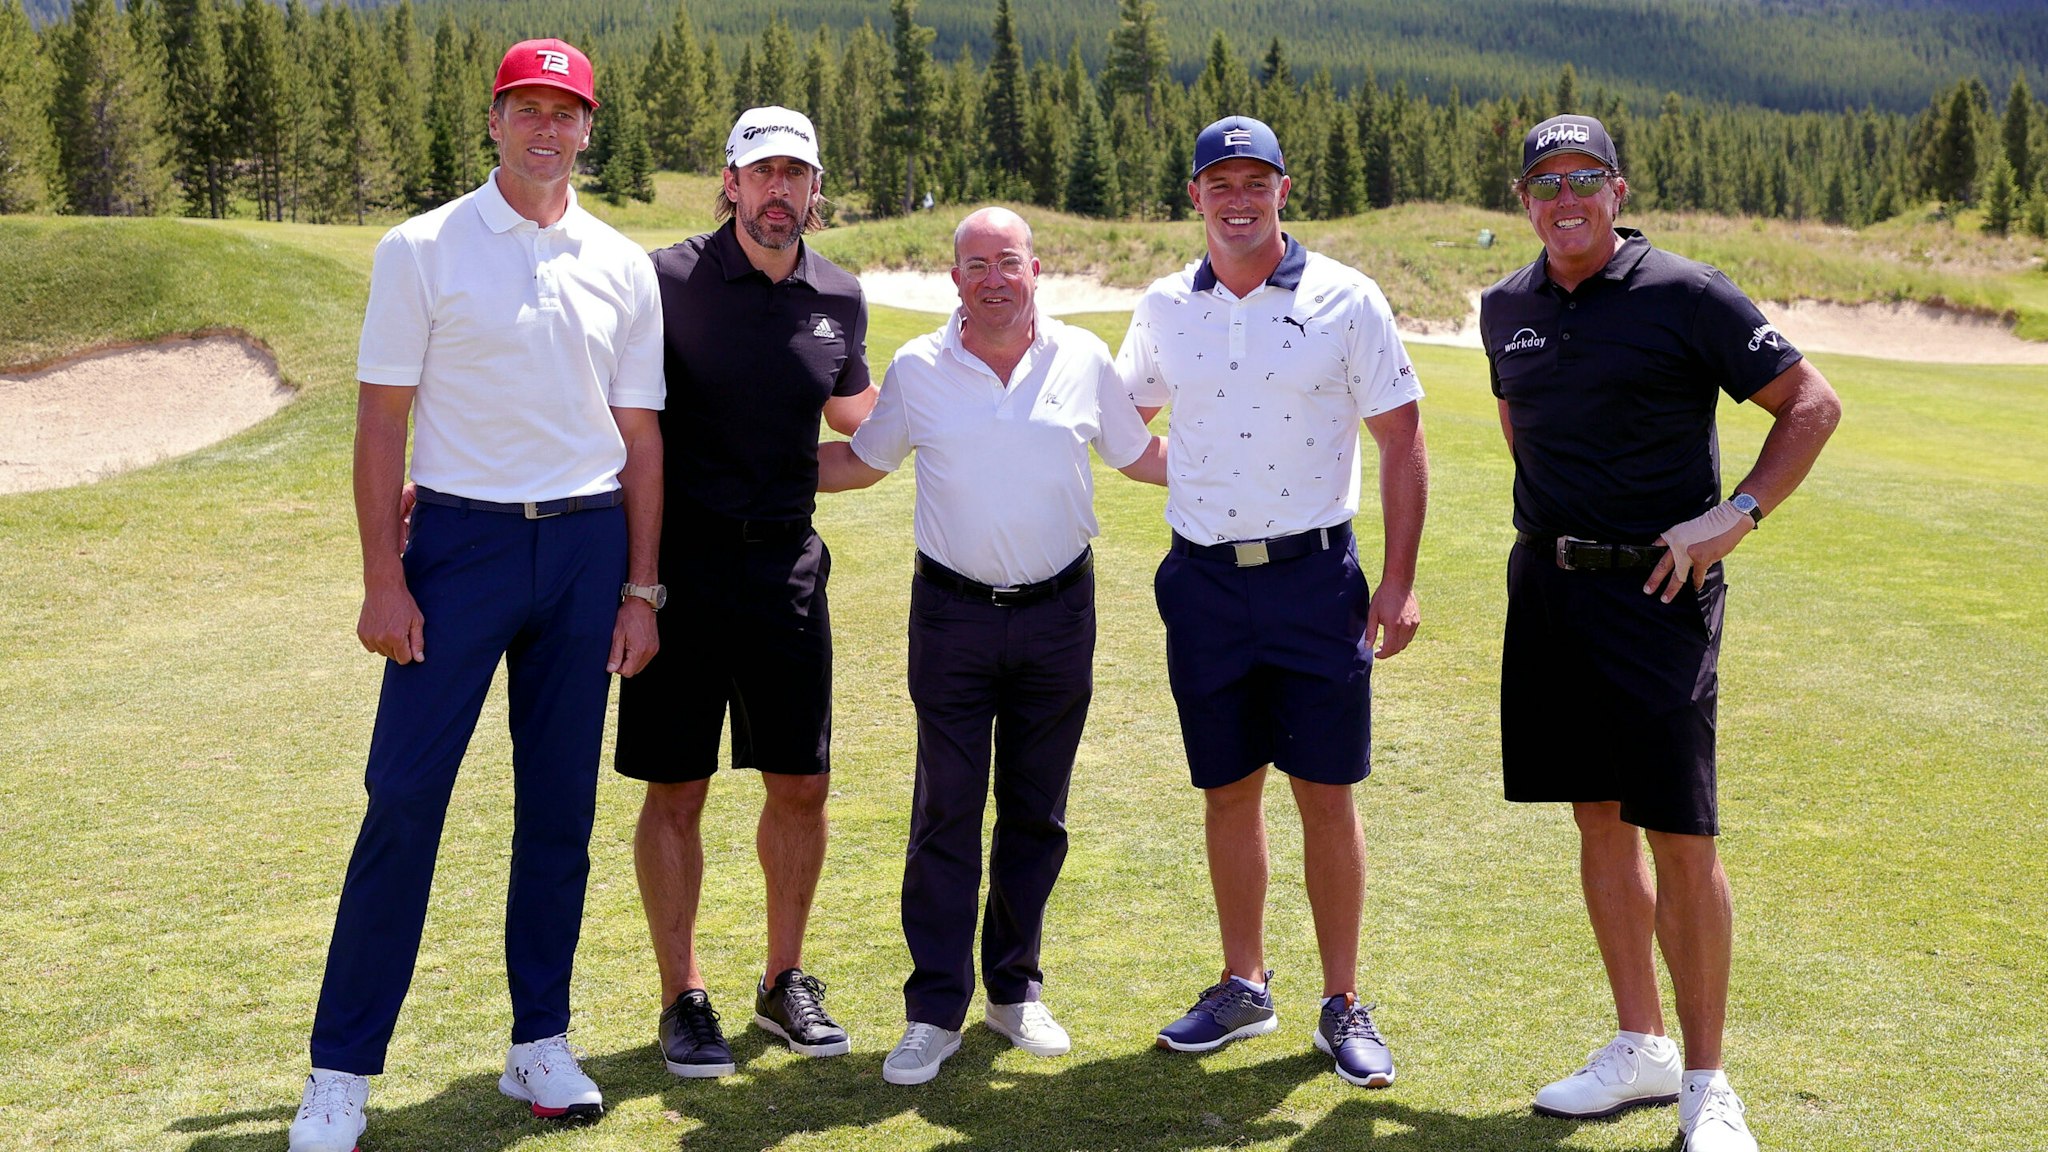 BIG SKY, MONTANA - JULY 06: (L-R) Tom Brady, Aaron Rodgers, CNN president Jeff Zucker, Bryson DeChambeau, and Phil Mickelson pose for photos during Capital One's The Match at The Reserve at Moonlight Basin on July 06, 2021 in Big Sky, Montana.